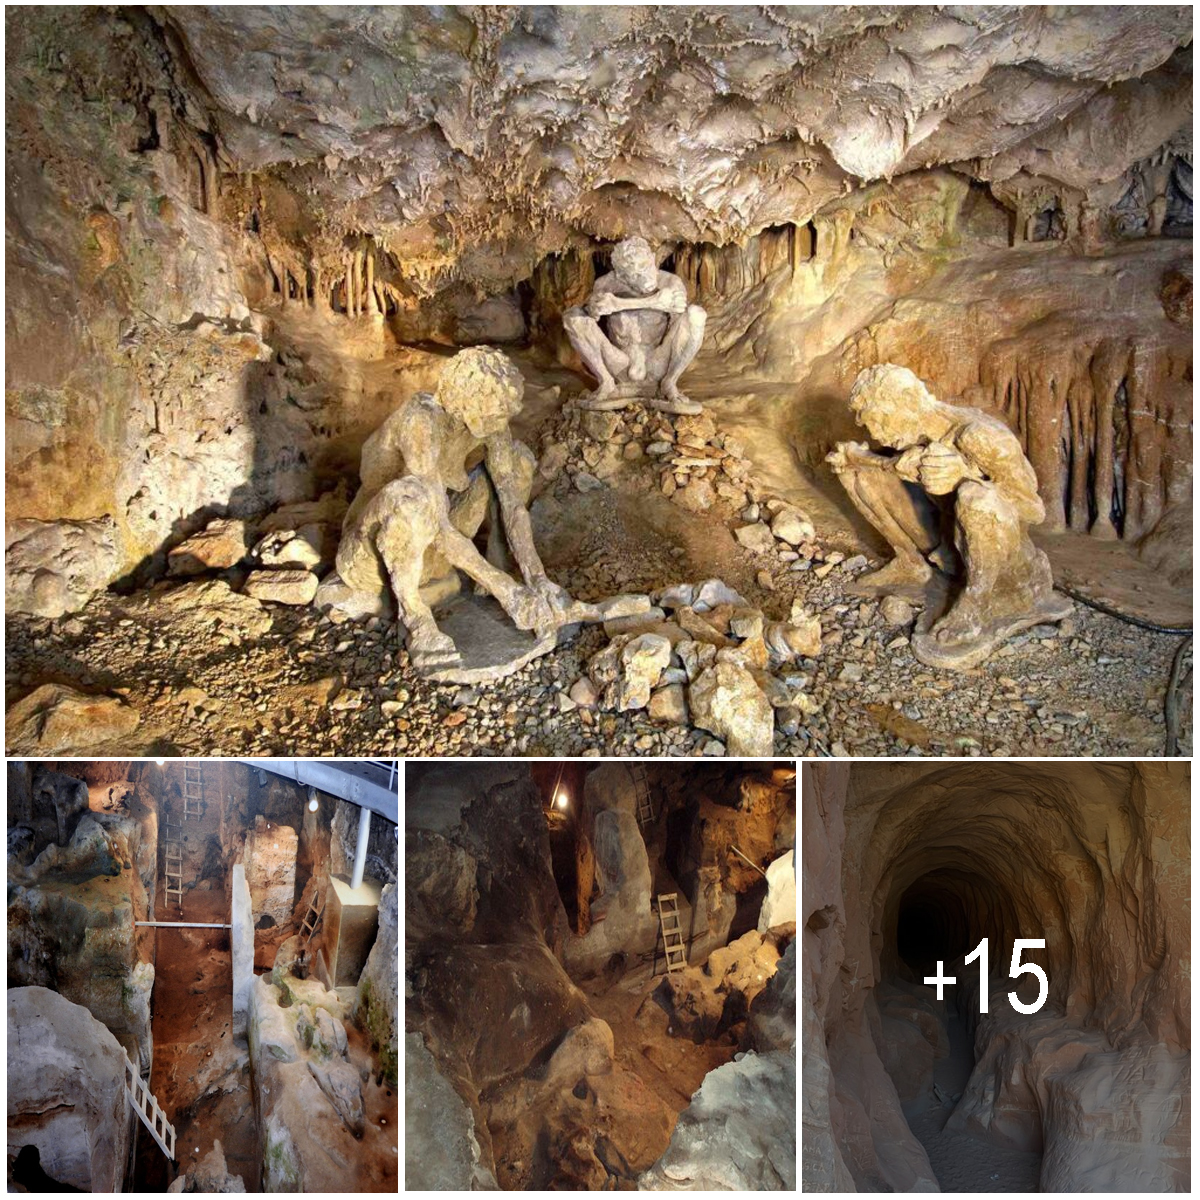 Ancient Secrets Of The Theopetra Cave Worlds Oldest Man Made Structure And Home To Humans 130000 Years Ago 